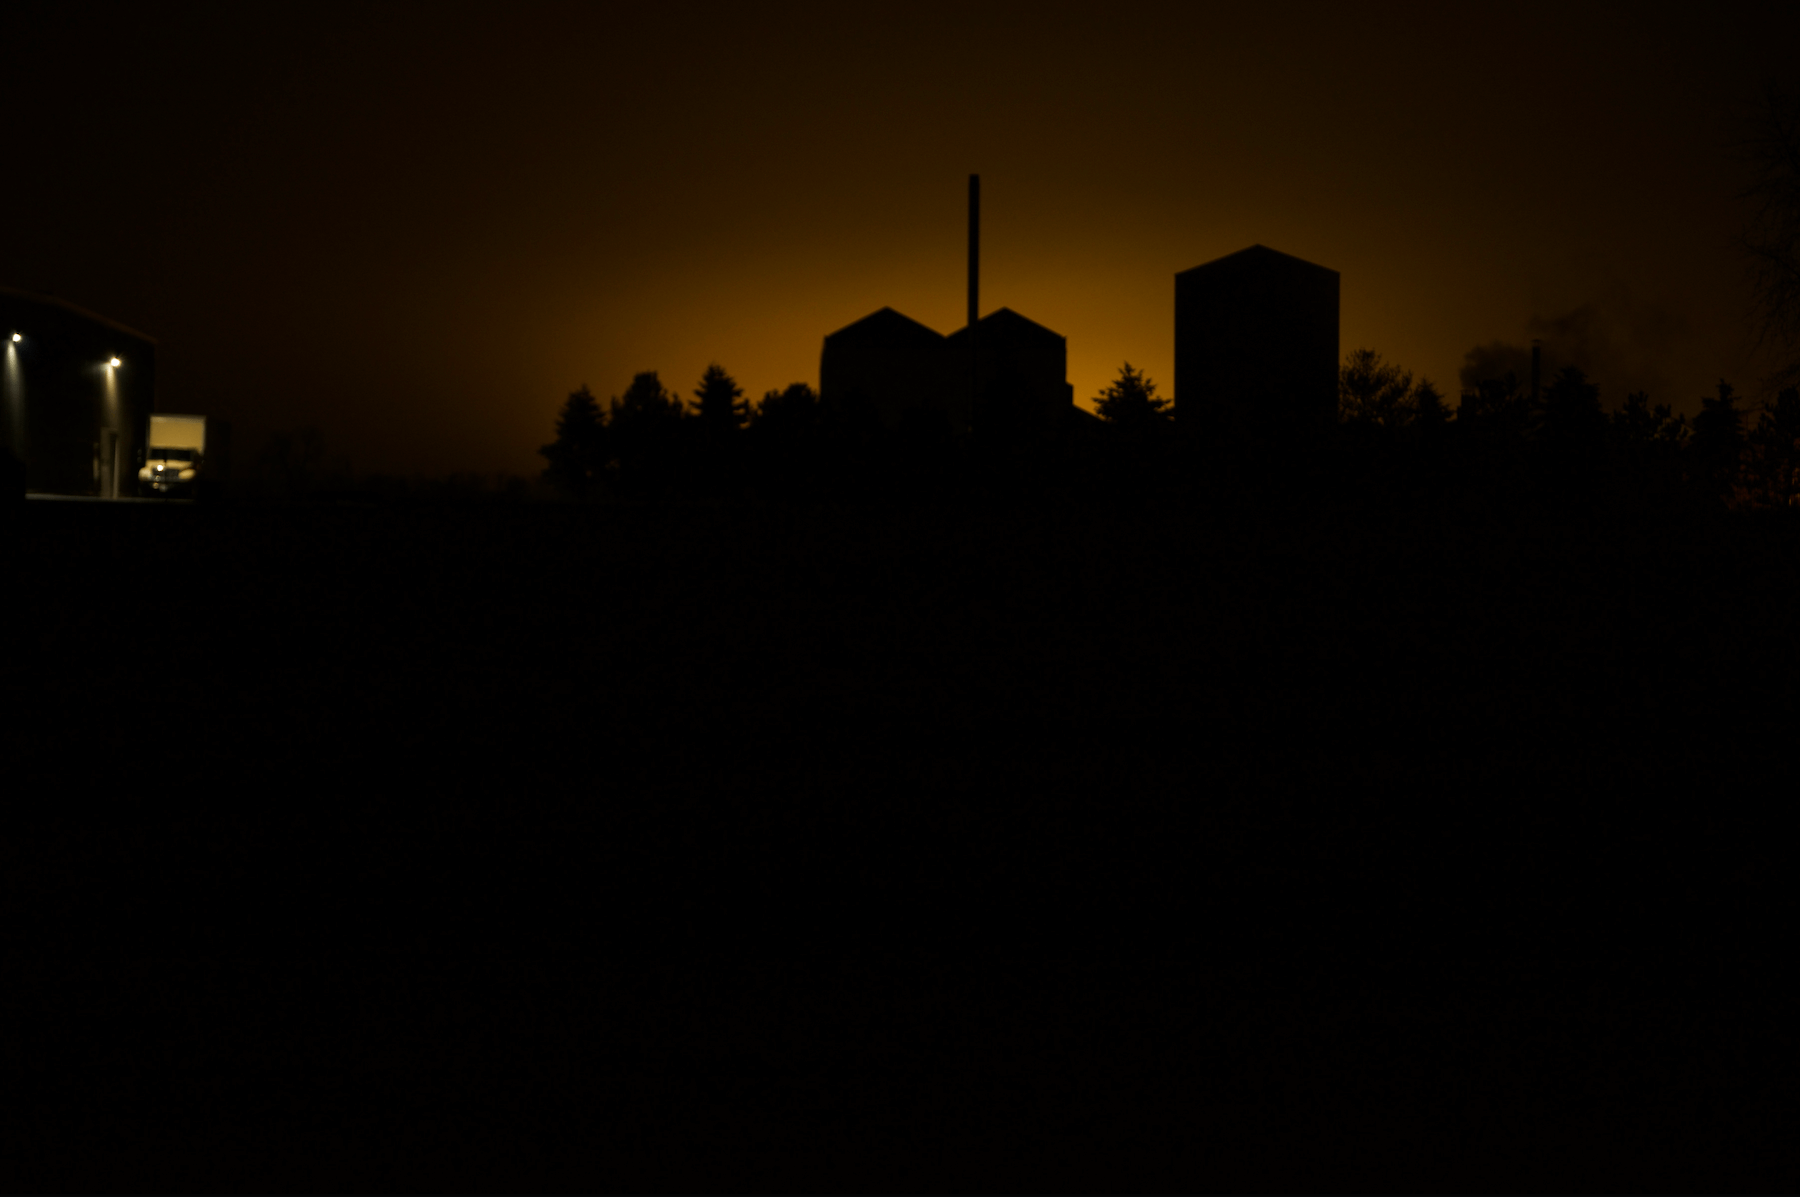 a silhouette of some weird building with a truck illuminated by the rising sun